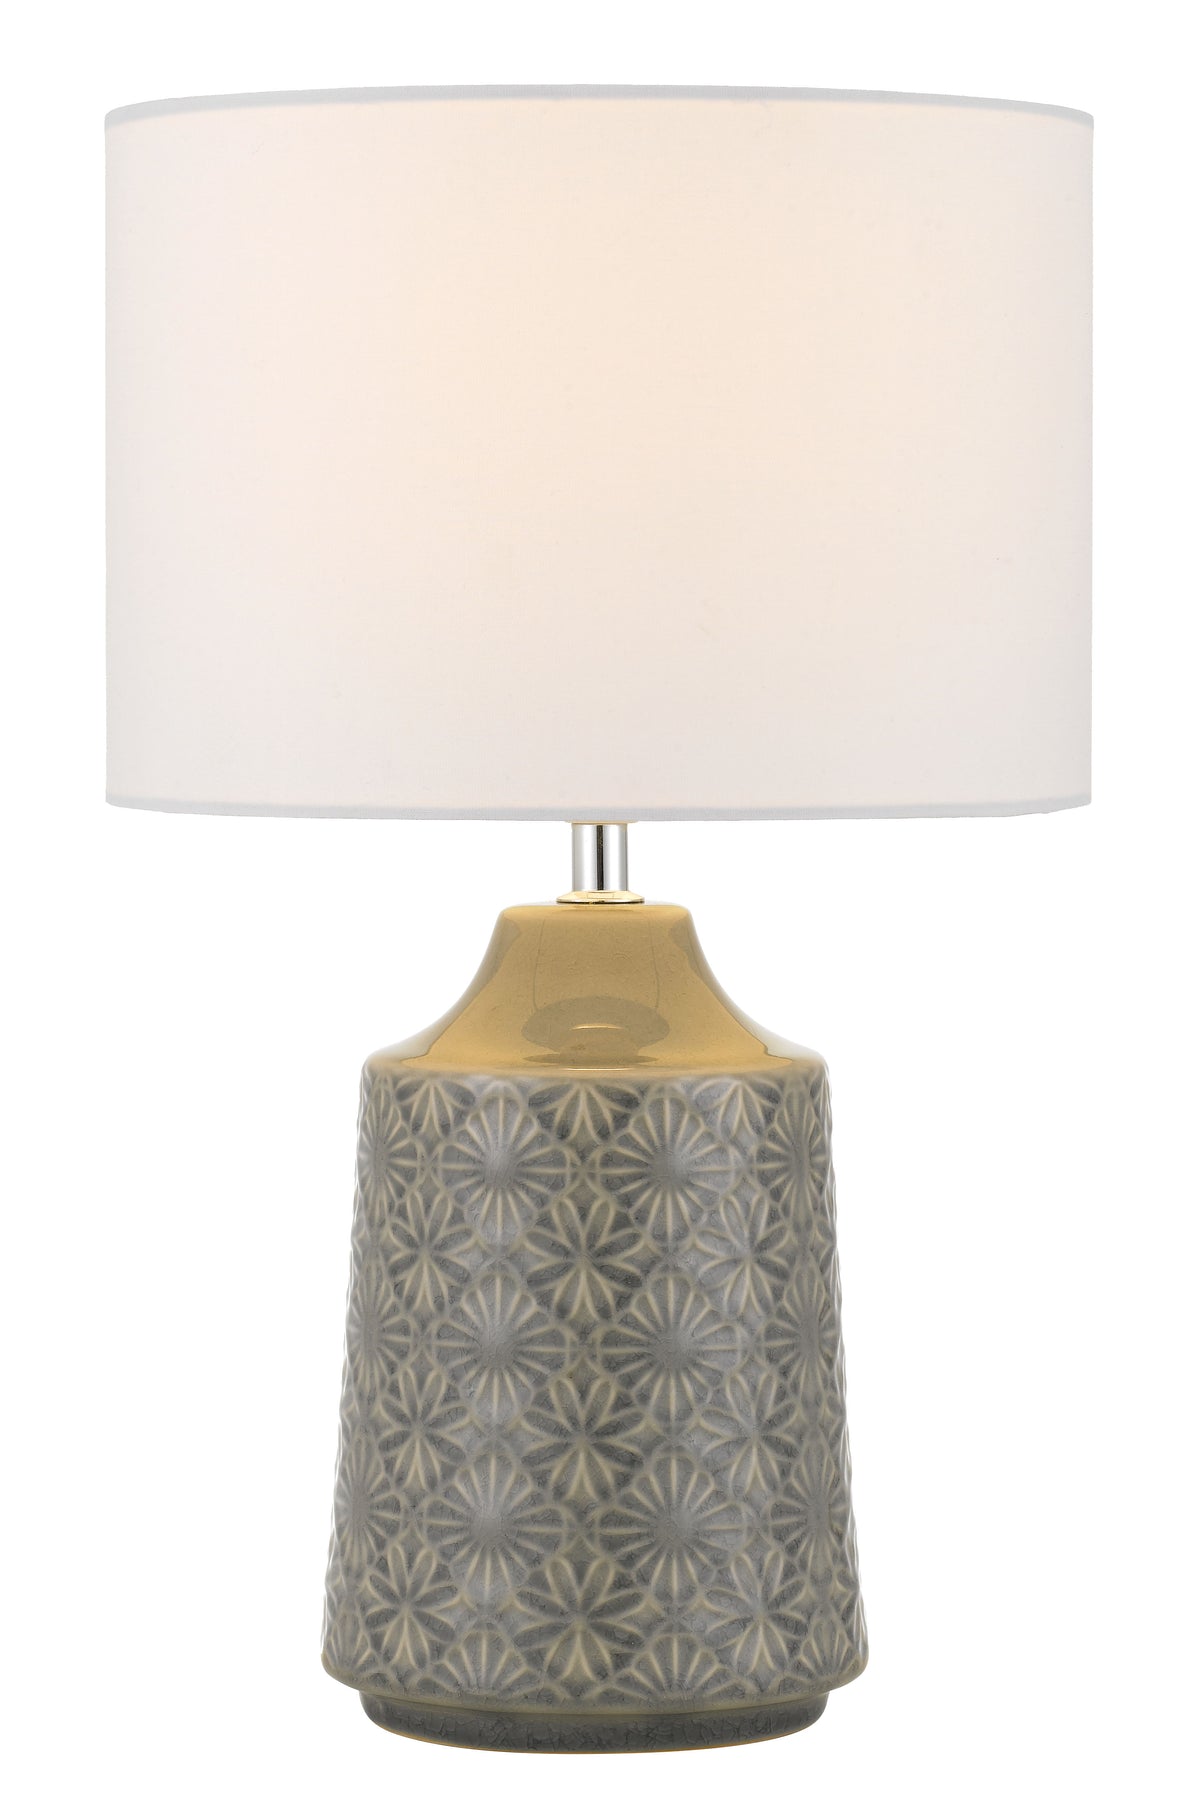 Fedon Grey and White Classic Ceramic Table Lamp